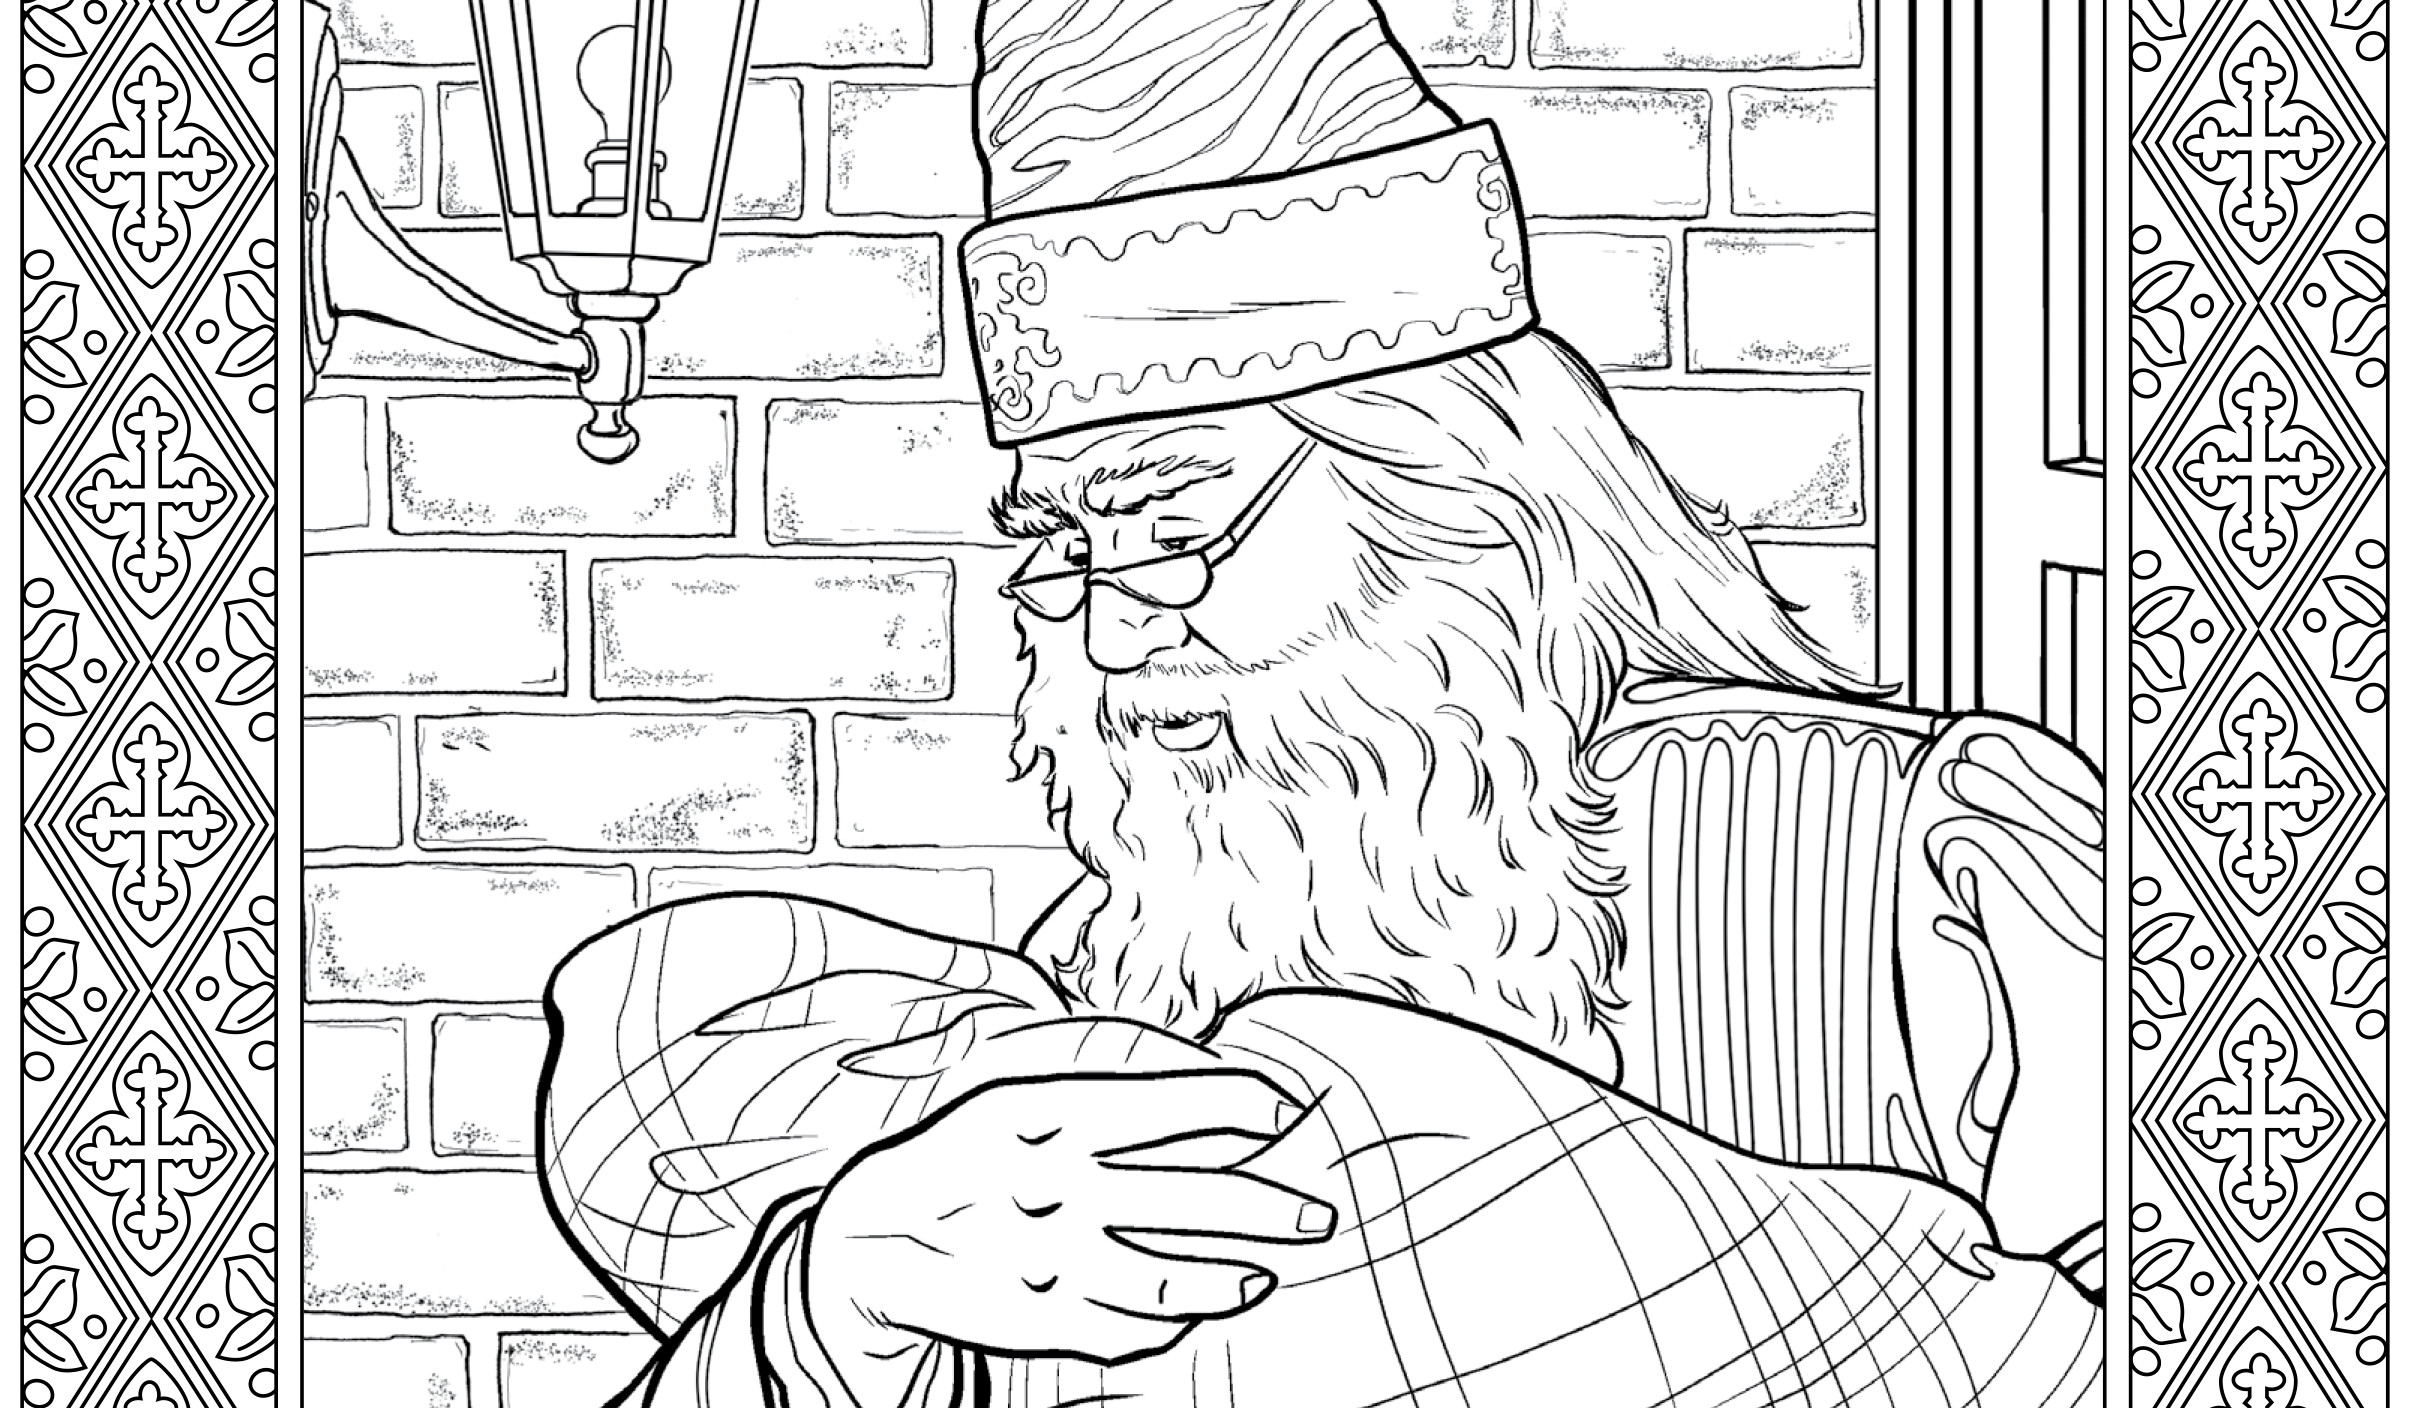 Harry Potter Coloring Pages For Adults
 Get a Sneak Peek of the New Harry Potter Coloring Book